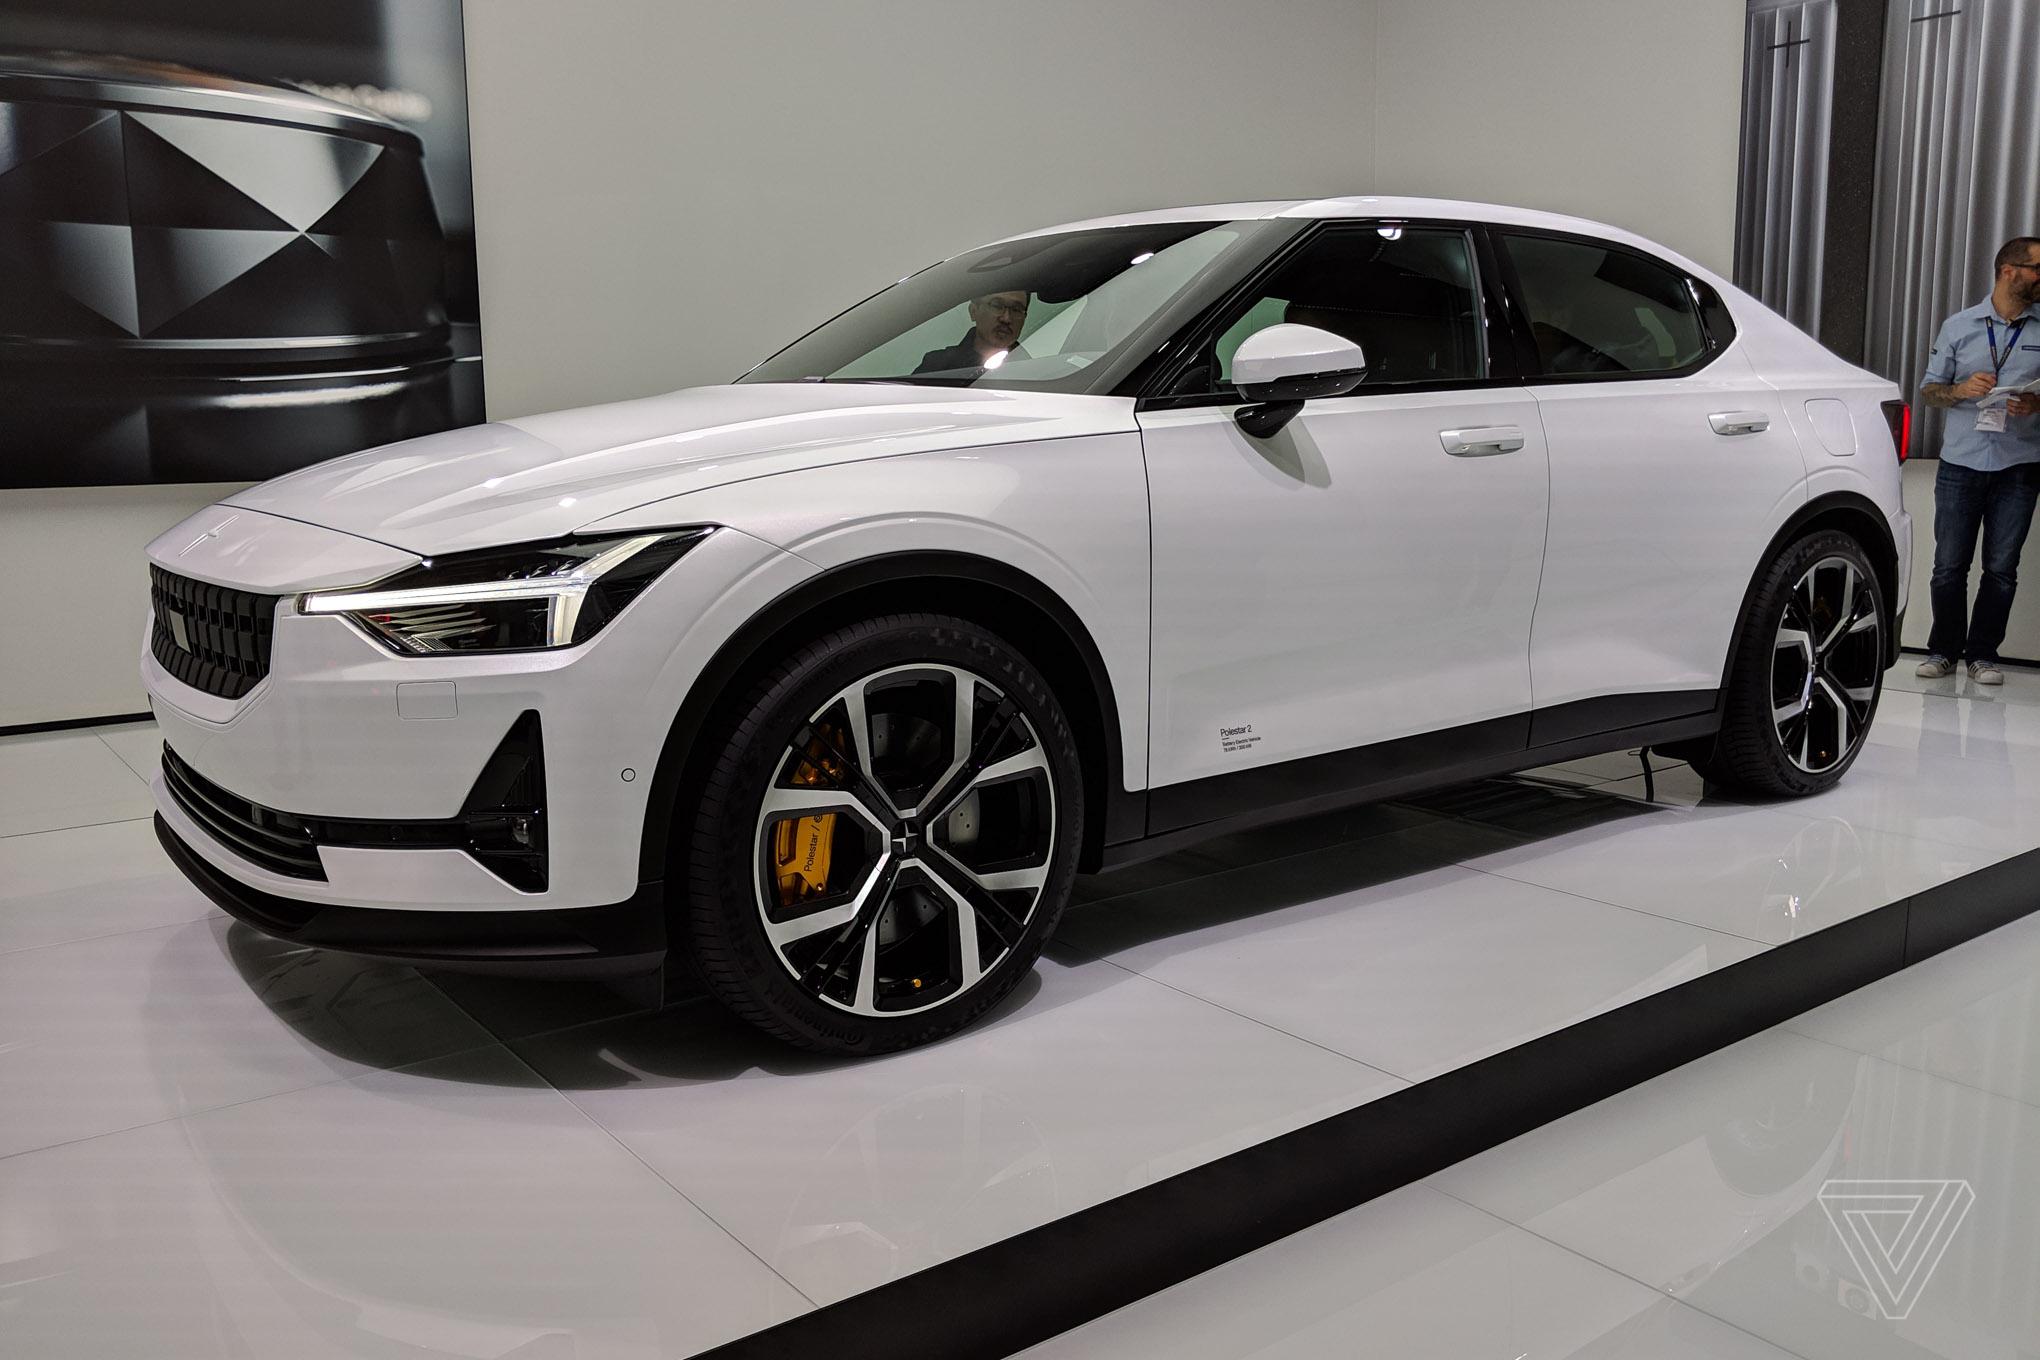 The Polestar ‘s secret weapon against Tesla’s Model is Android